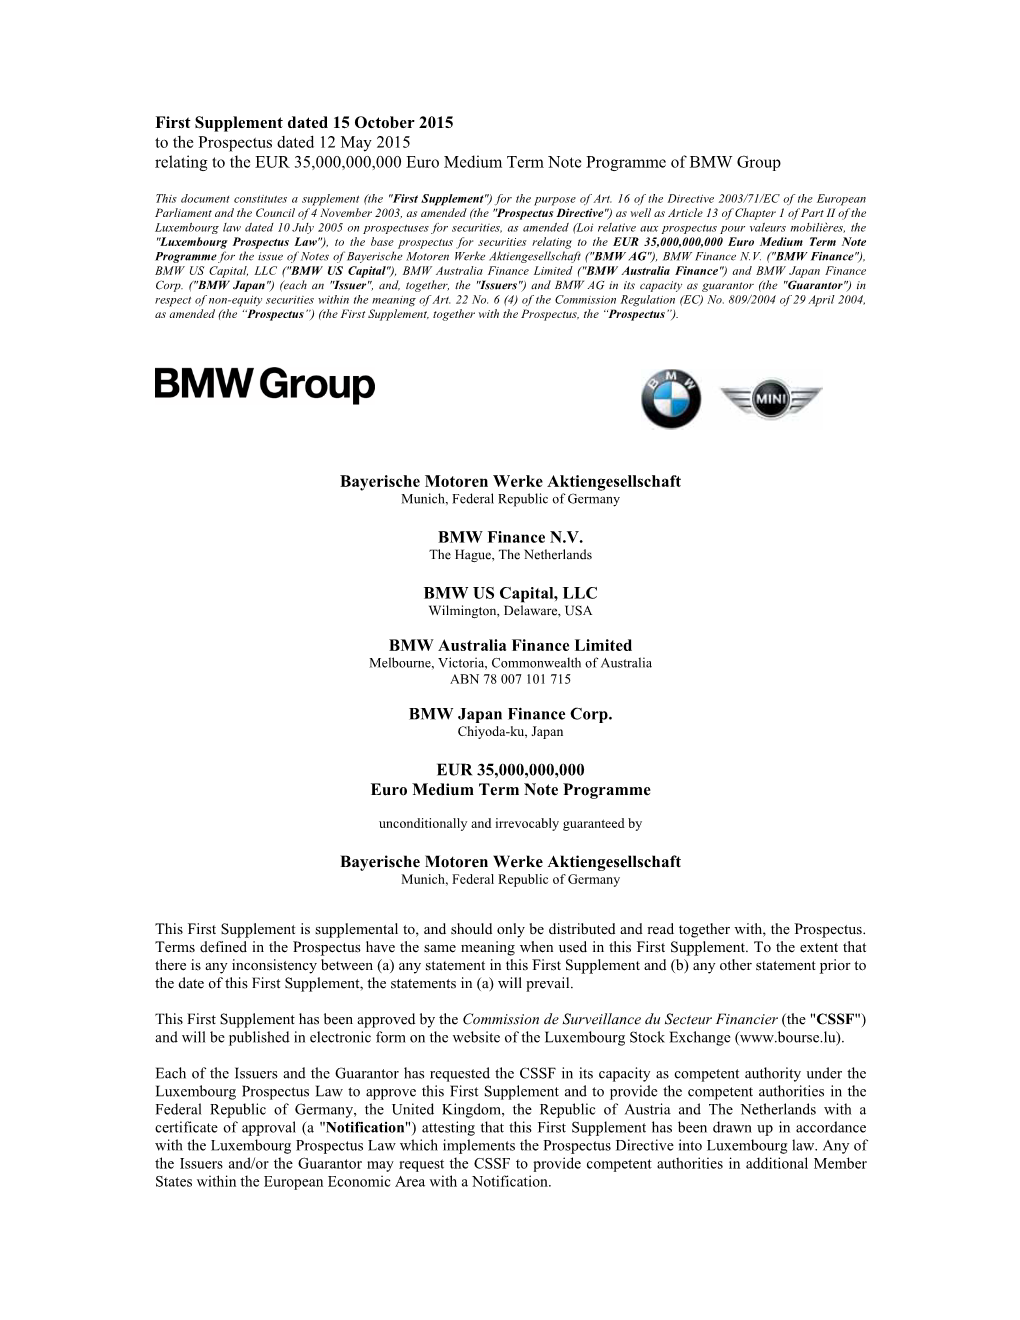 First Supplement Dated 15 October 2015 to the Prospectus Dated 12 May 2015 Relating to the EUR 35,000,000,000 Euro Medium Term Note Programme of BMW Group